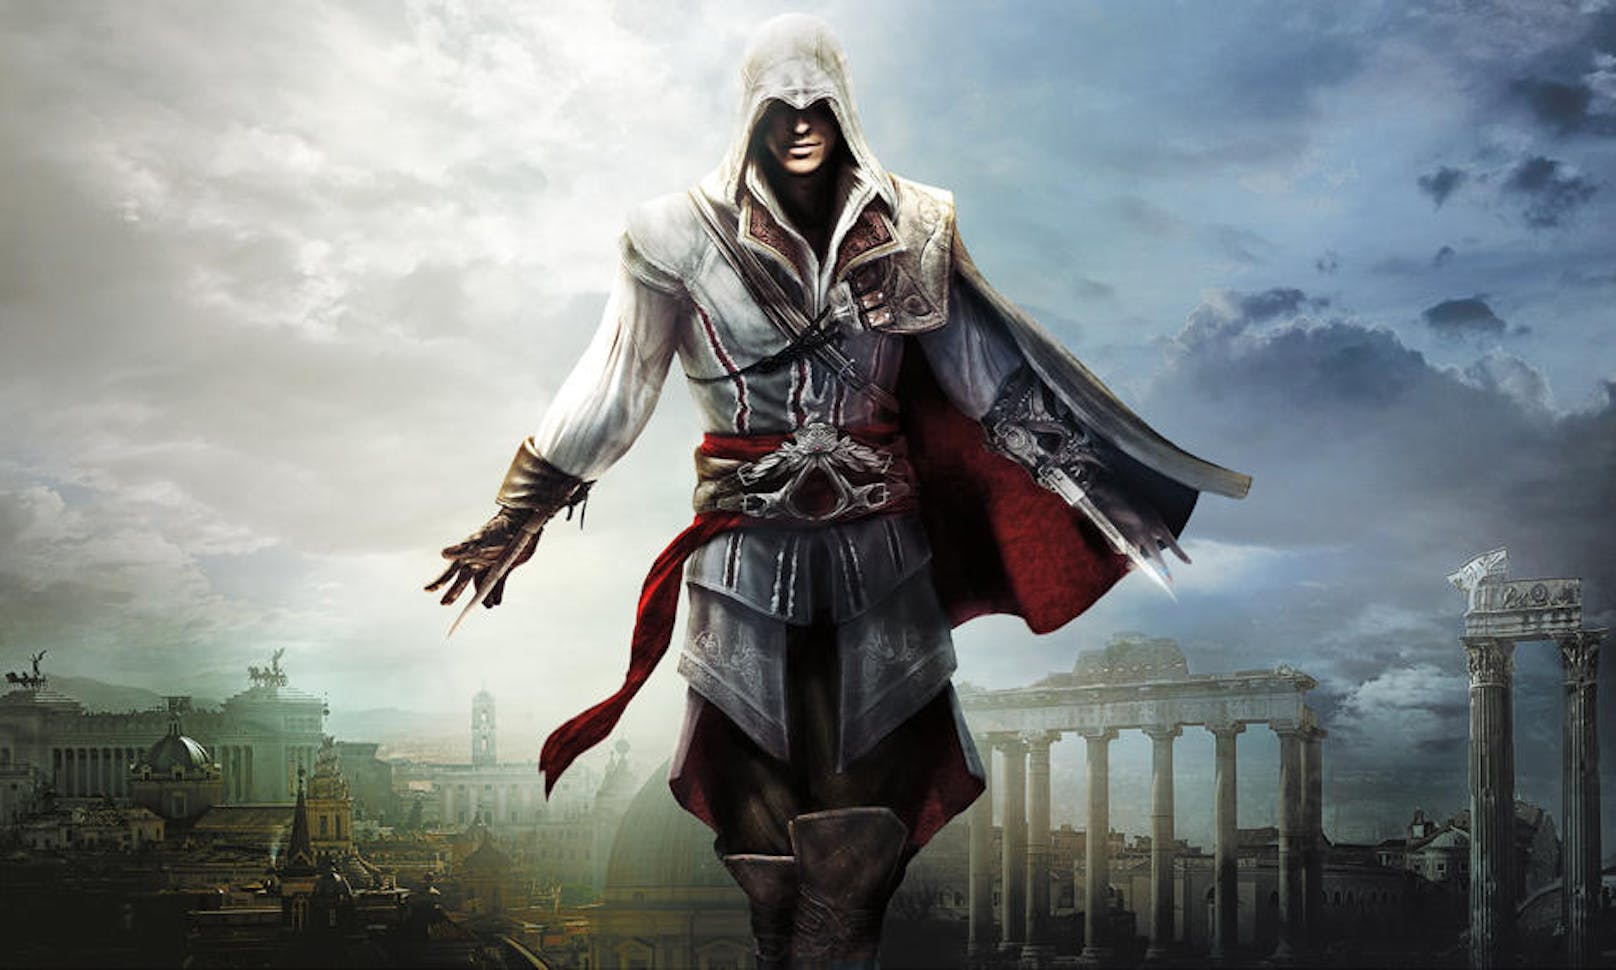  <a href="https://www.heute.at/digital/games/story/Assassin-s-Creed---The-Ezio-Collection-im-Test-59601355" target="_blank">Assassin's Creed The Ezio Collection</a>